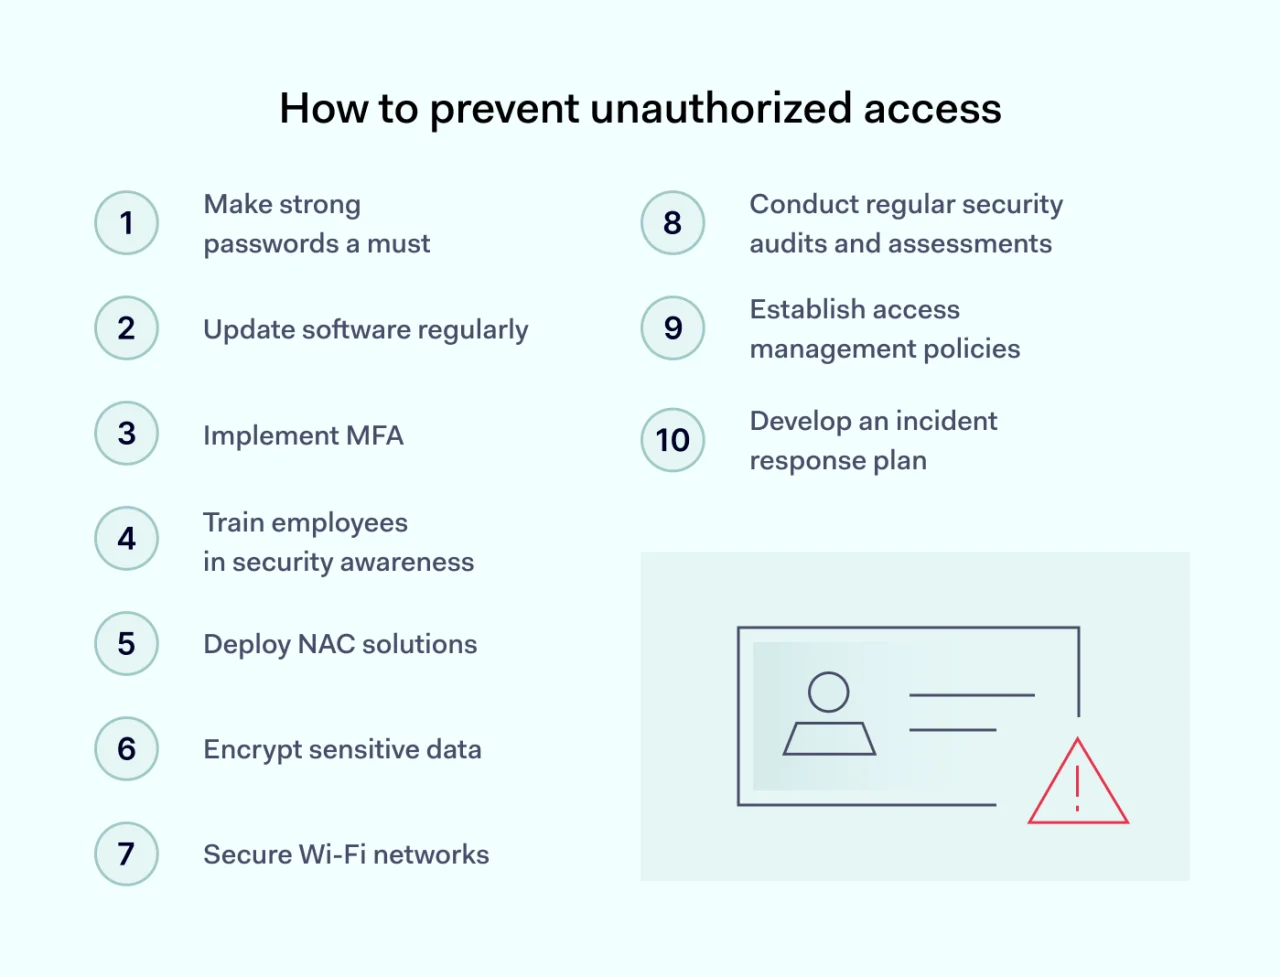 How to prevent unauthorized access